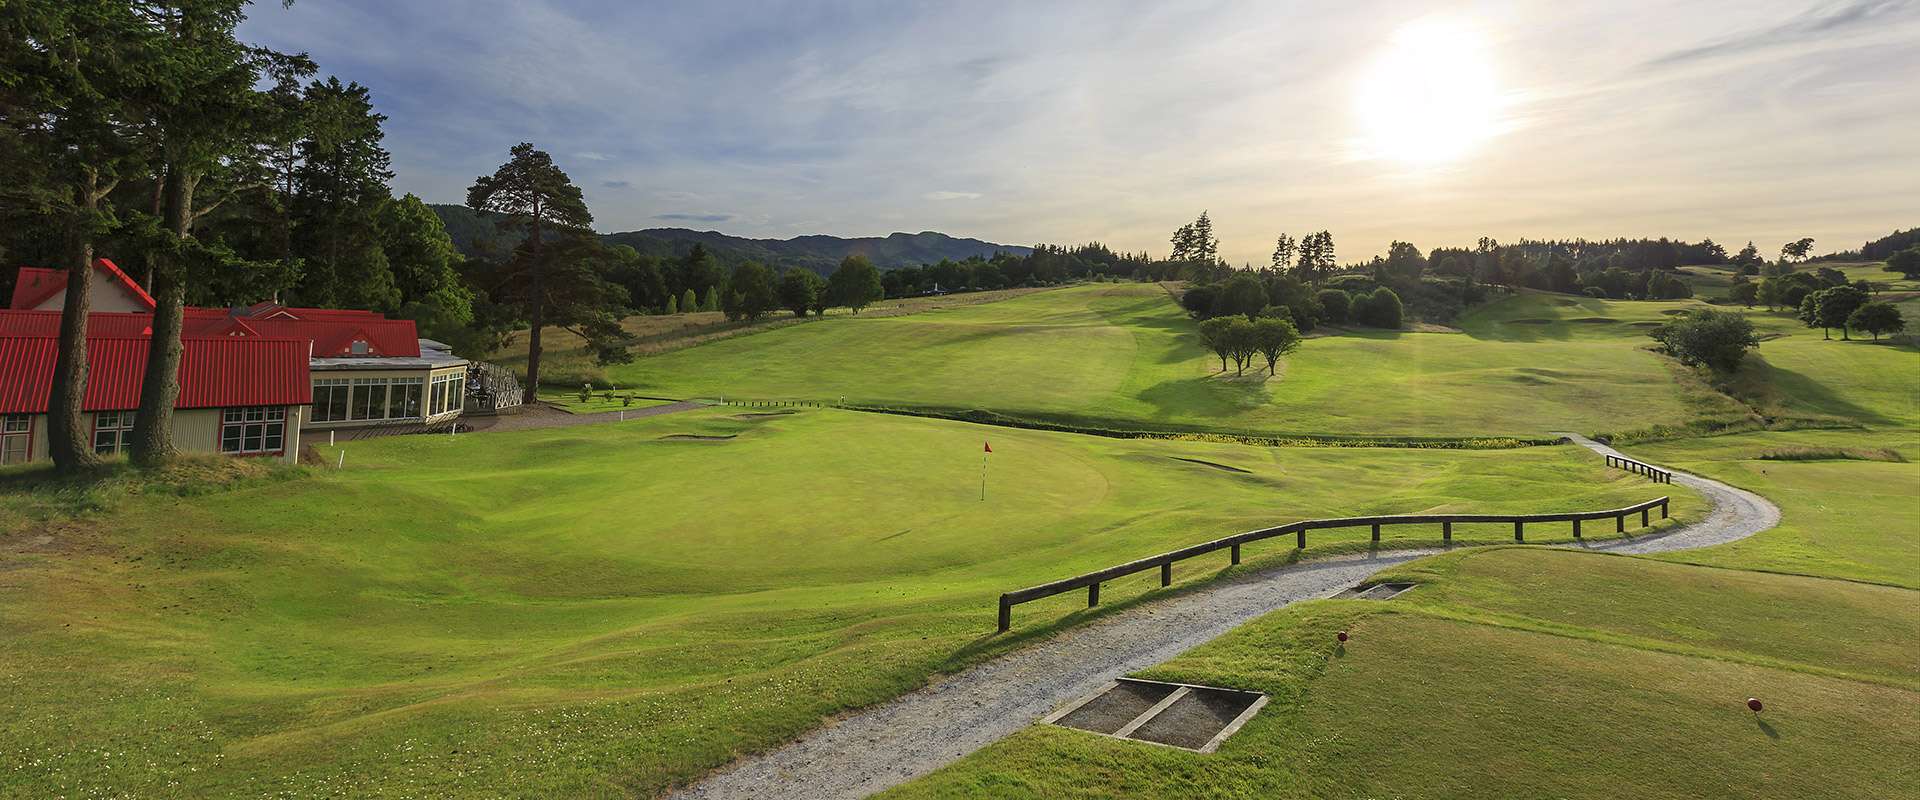 Pitlochry Golf Course Gallery Image 1